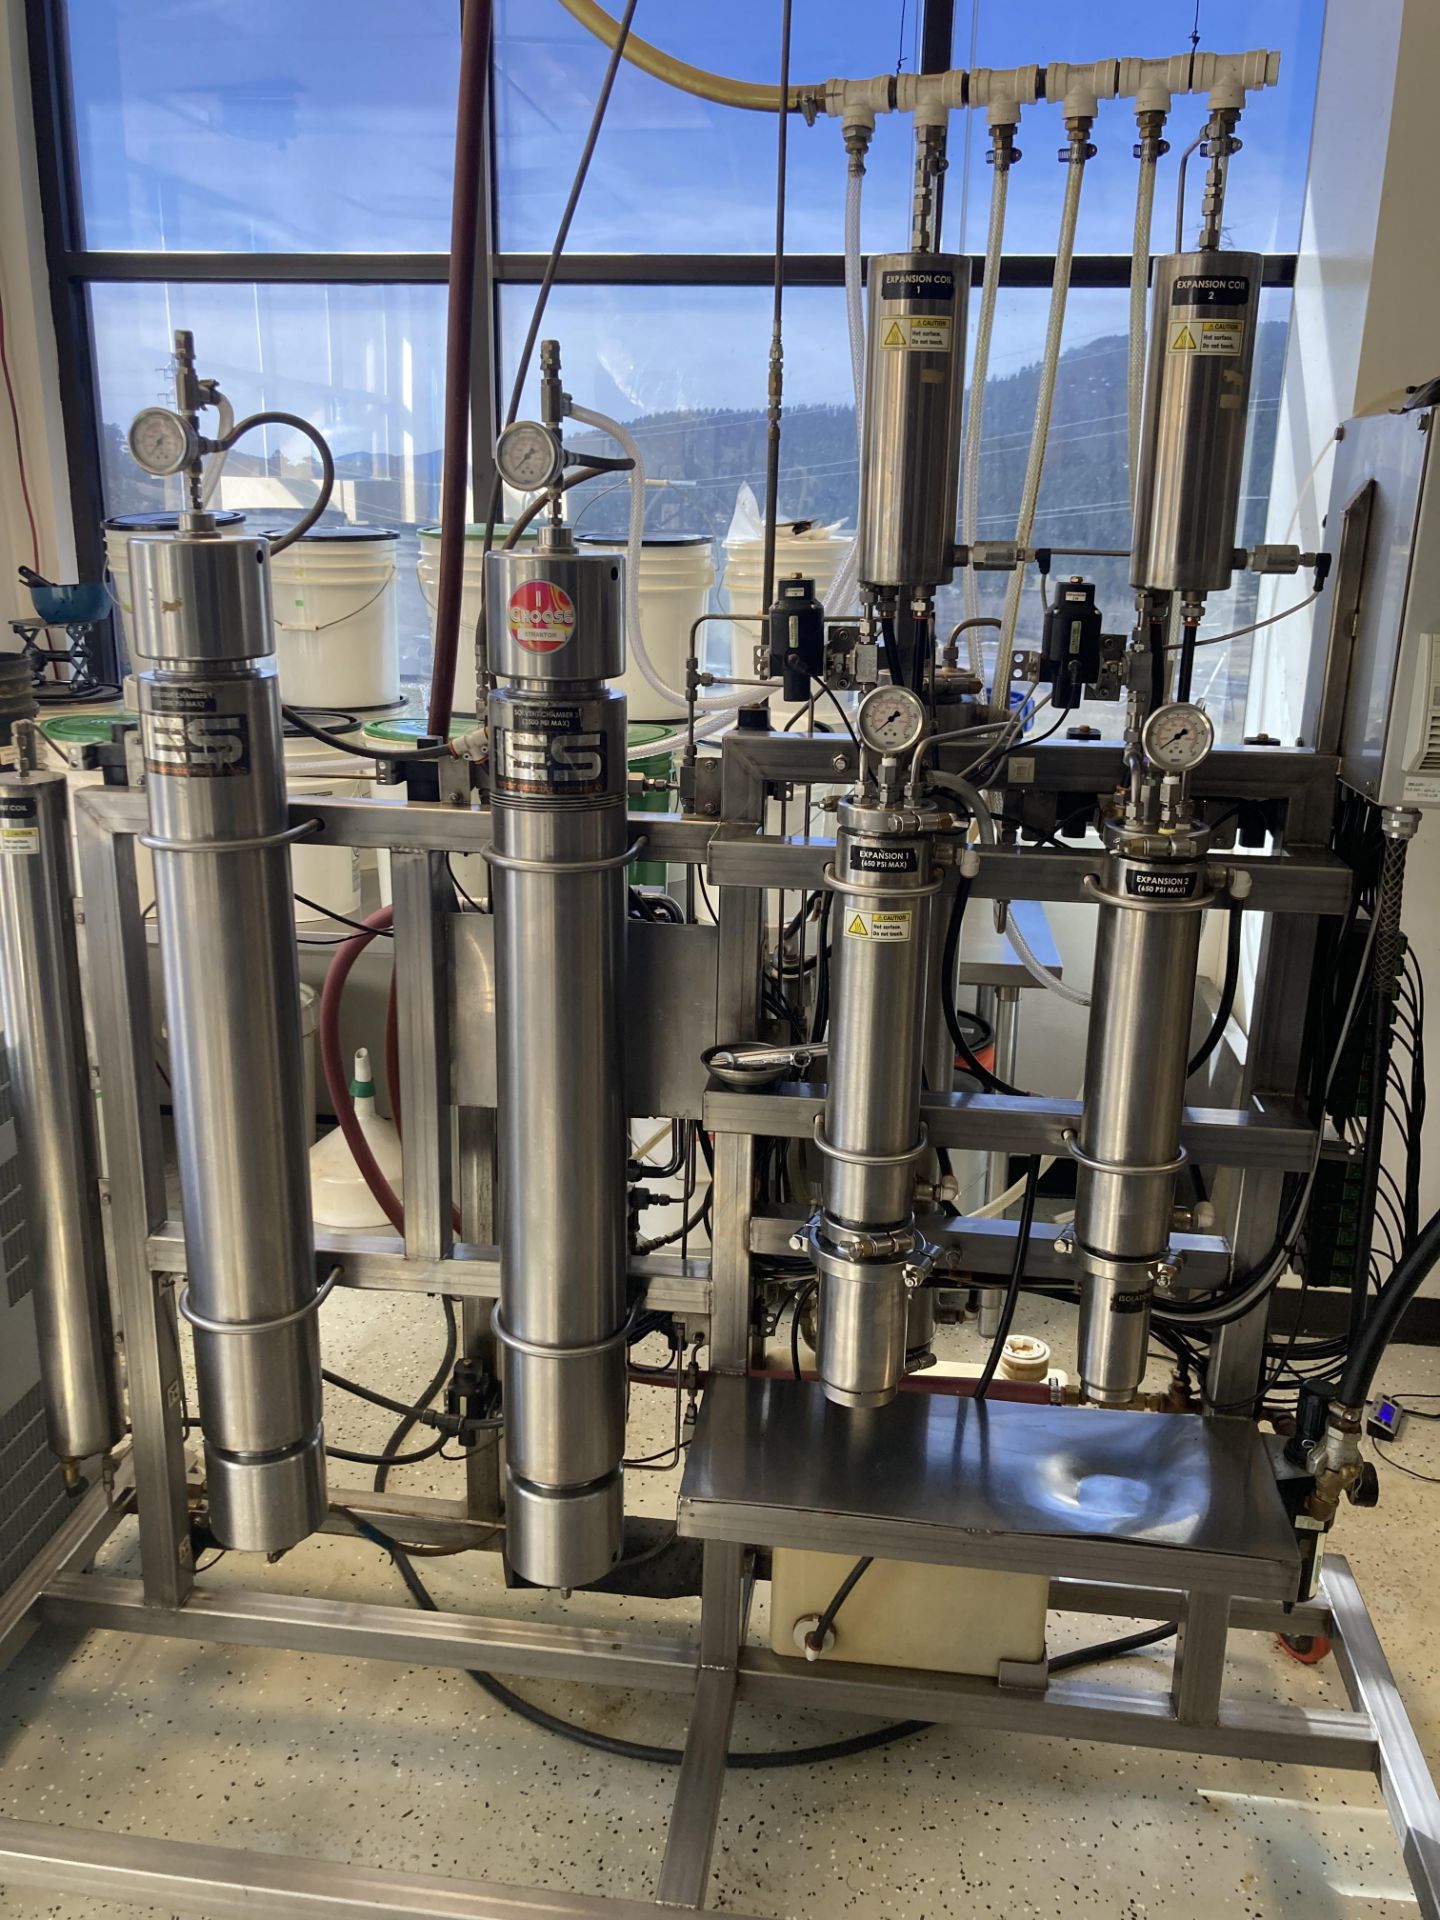 (Located in Evergreen, CO) Supercritical Pneumatic 10L CO2 Extractor w/ Chiller - Bild 2 aus 5